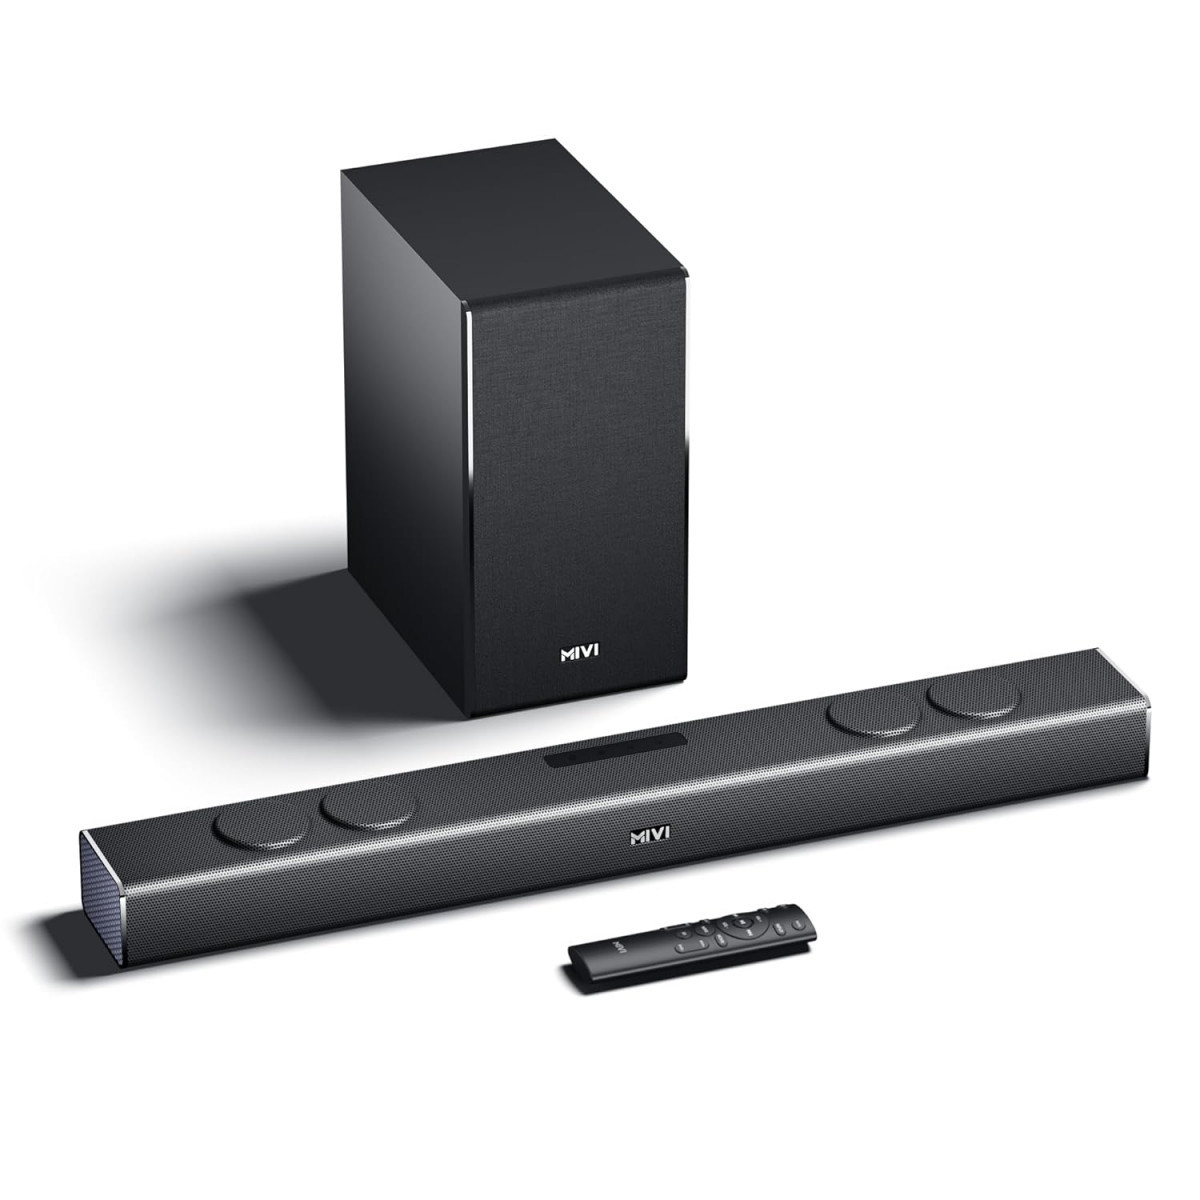 Mivi Fort Q350 Soundbar with 350W Surround Sound 21 Channel soundbar with a Wireless External subwoofer Multiple EQ and Input Modes Remote Accessibility BT v53 Made in India Sound bar for TV